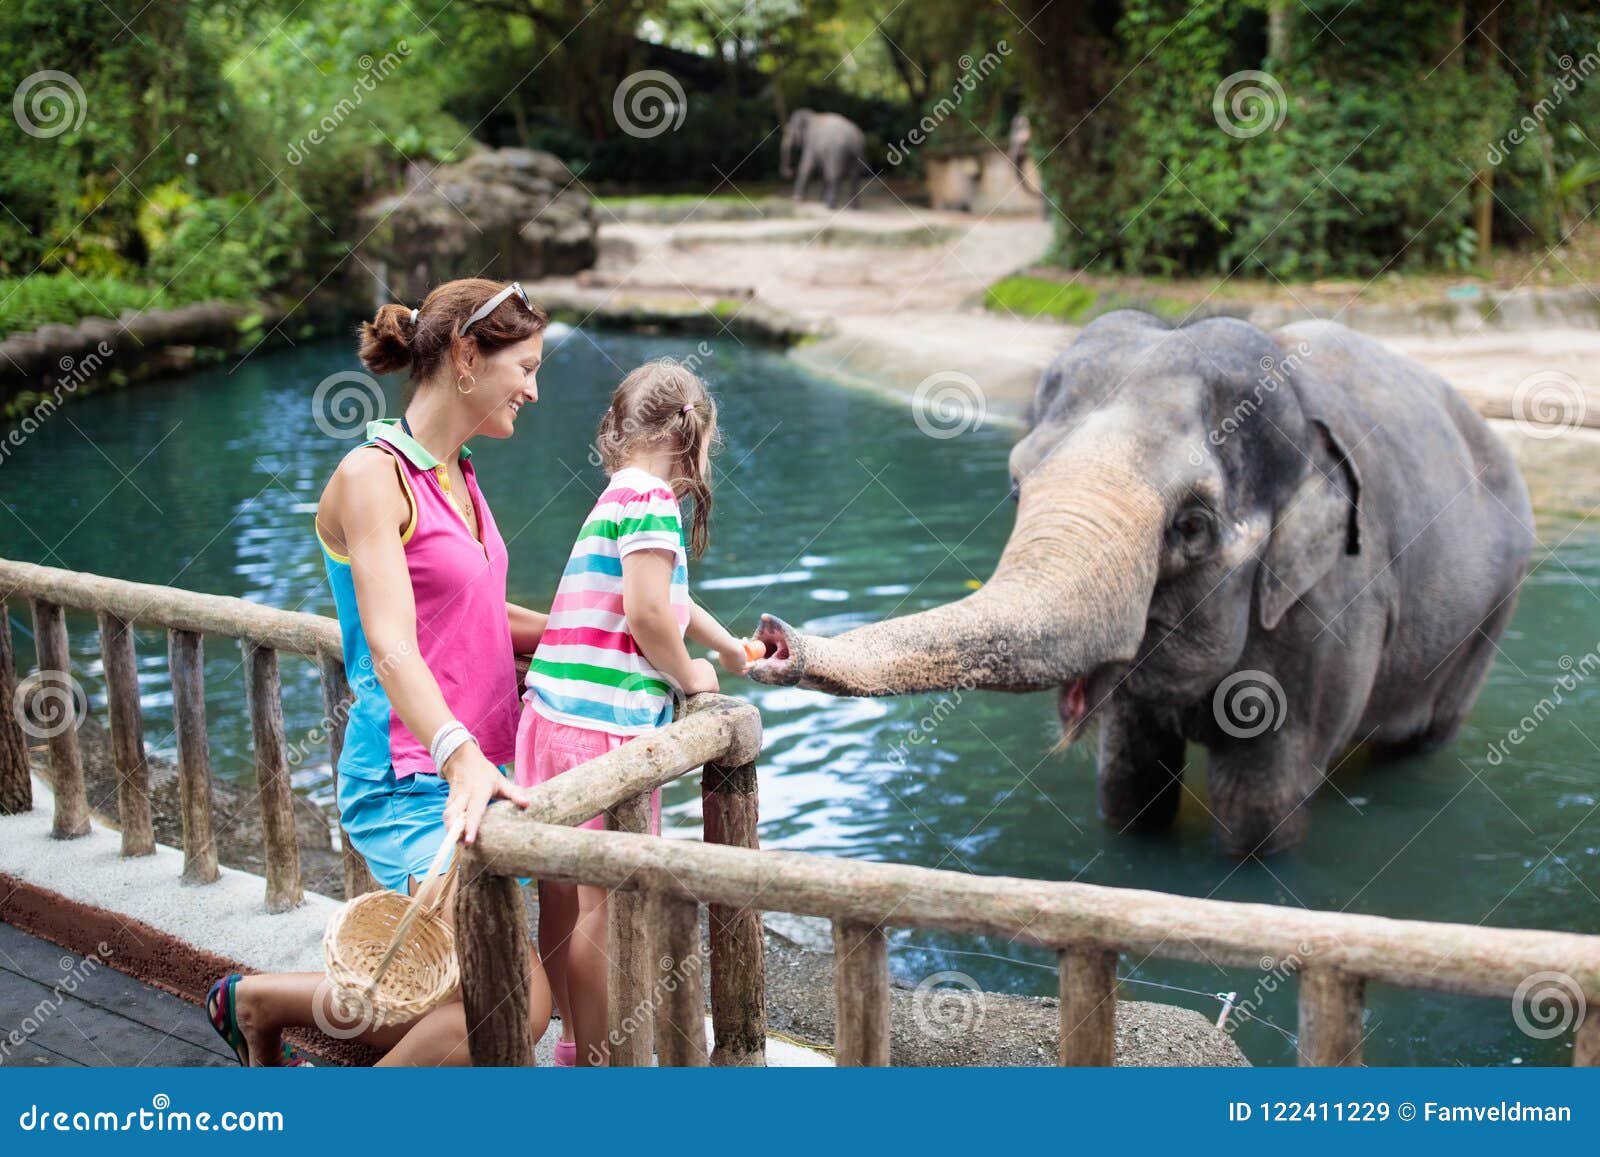 kids feed elephant in zoo. family at animal park.